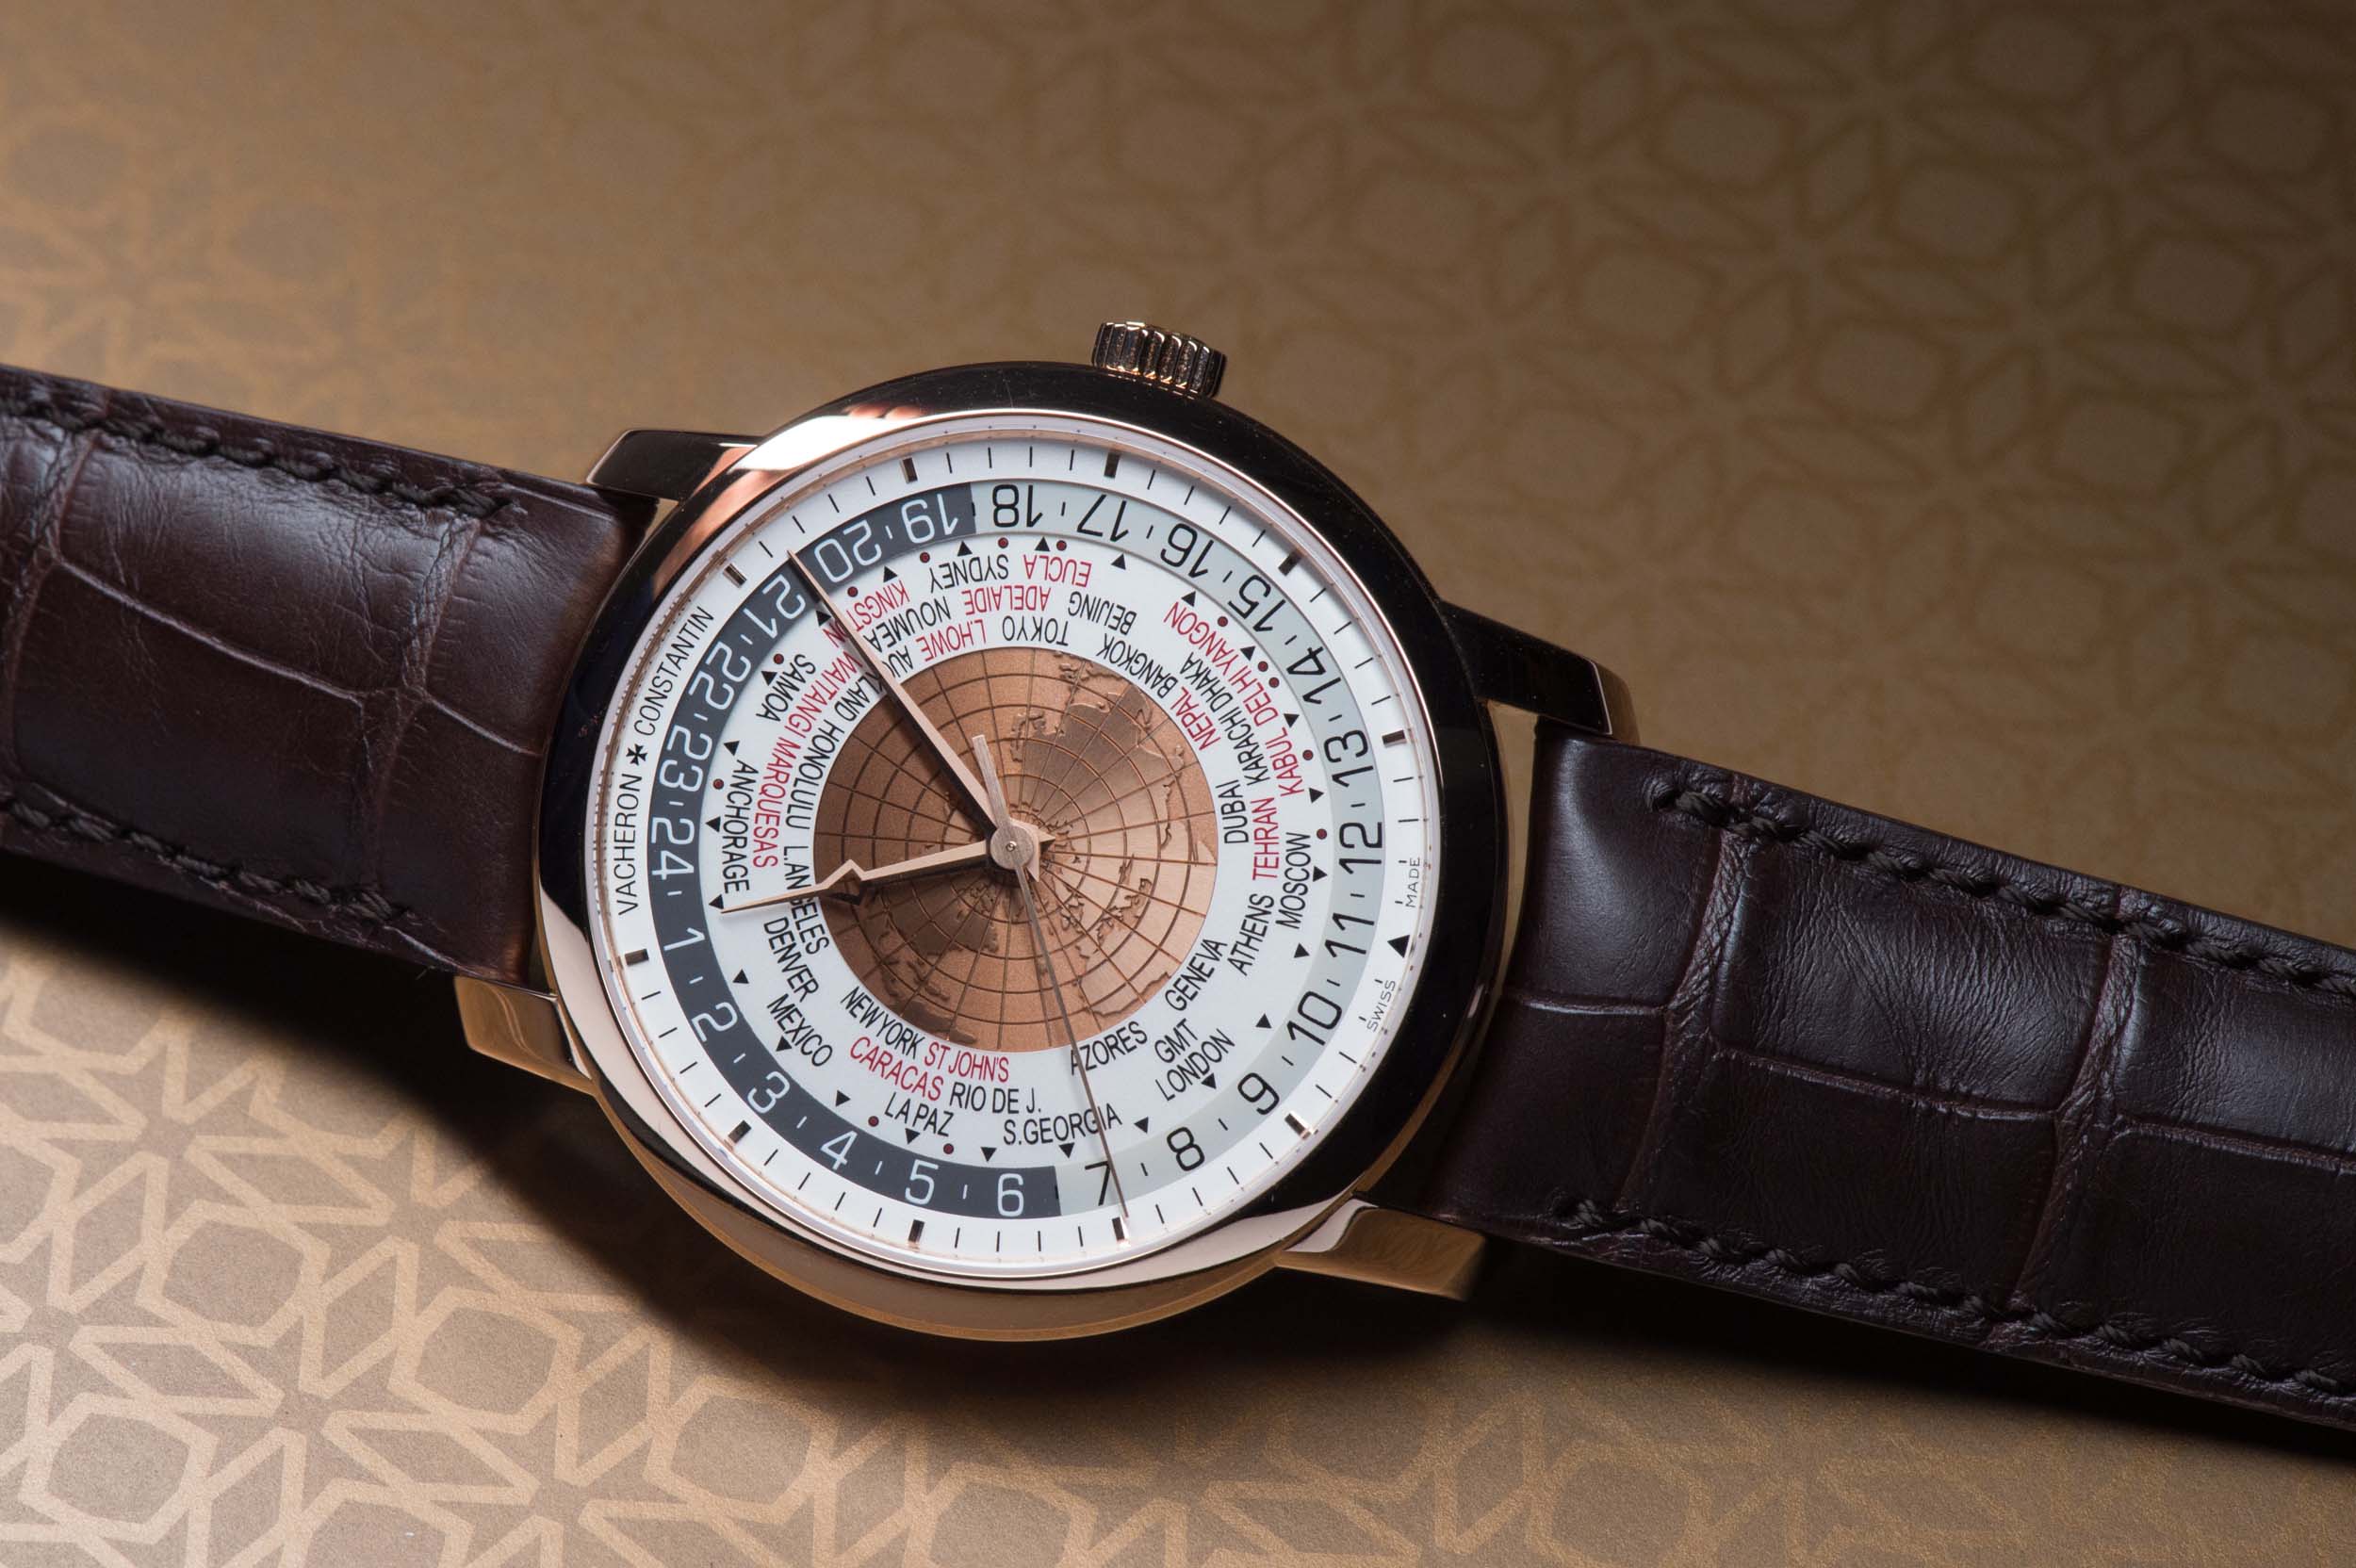 Introducing The Vacheron Constantin Traditionnelle World Time (Live Pictures And Specs From Watches & Wonders 2015)